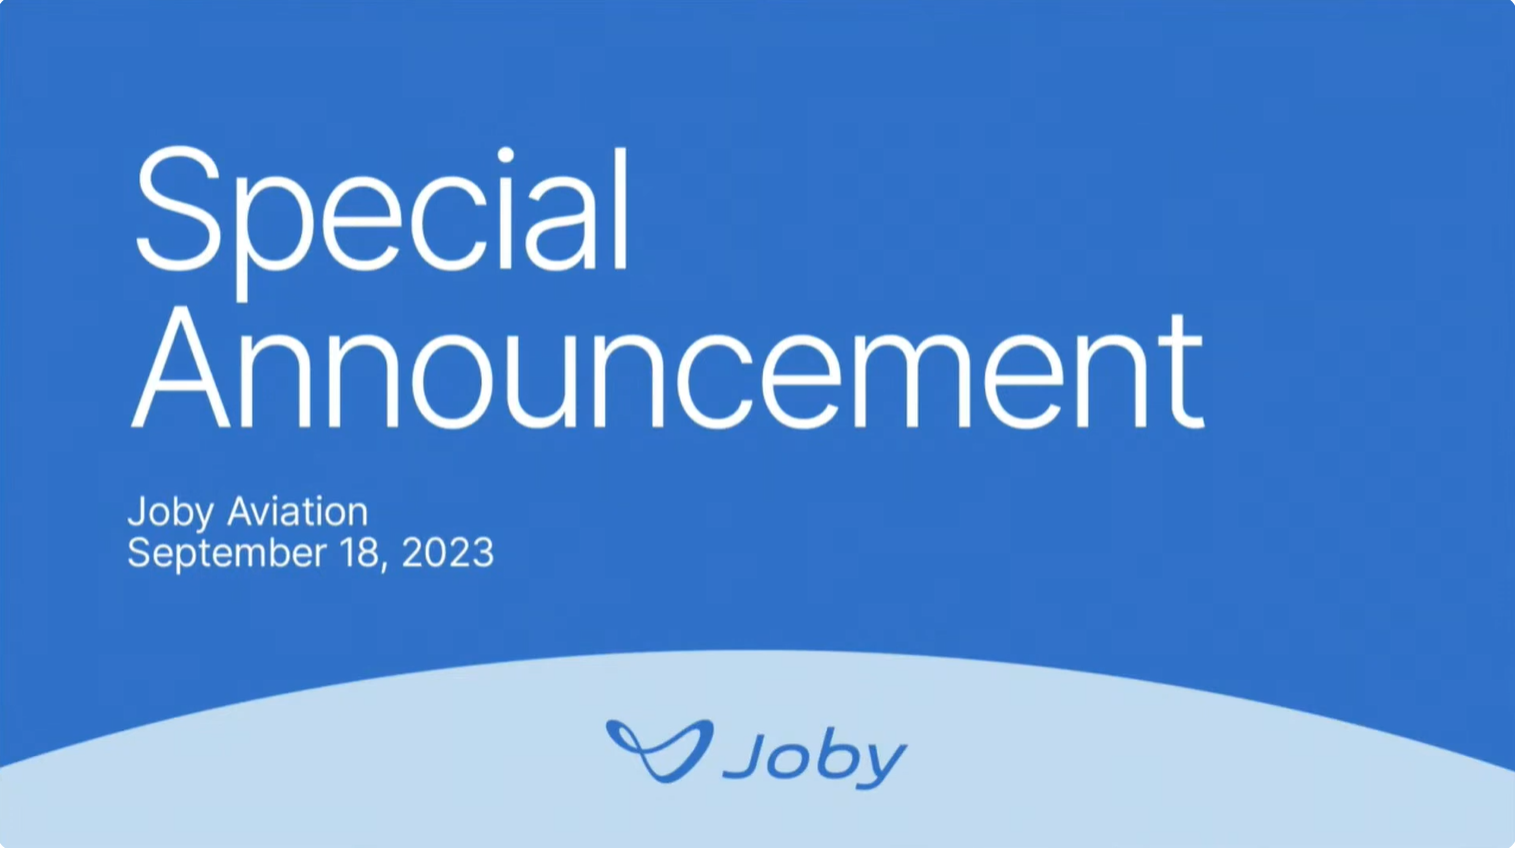 Special Announcement, Joby Aviation, September 18, 2023